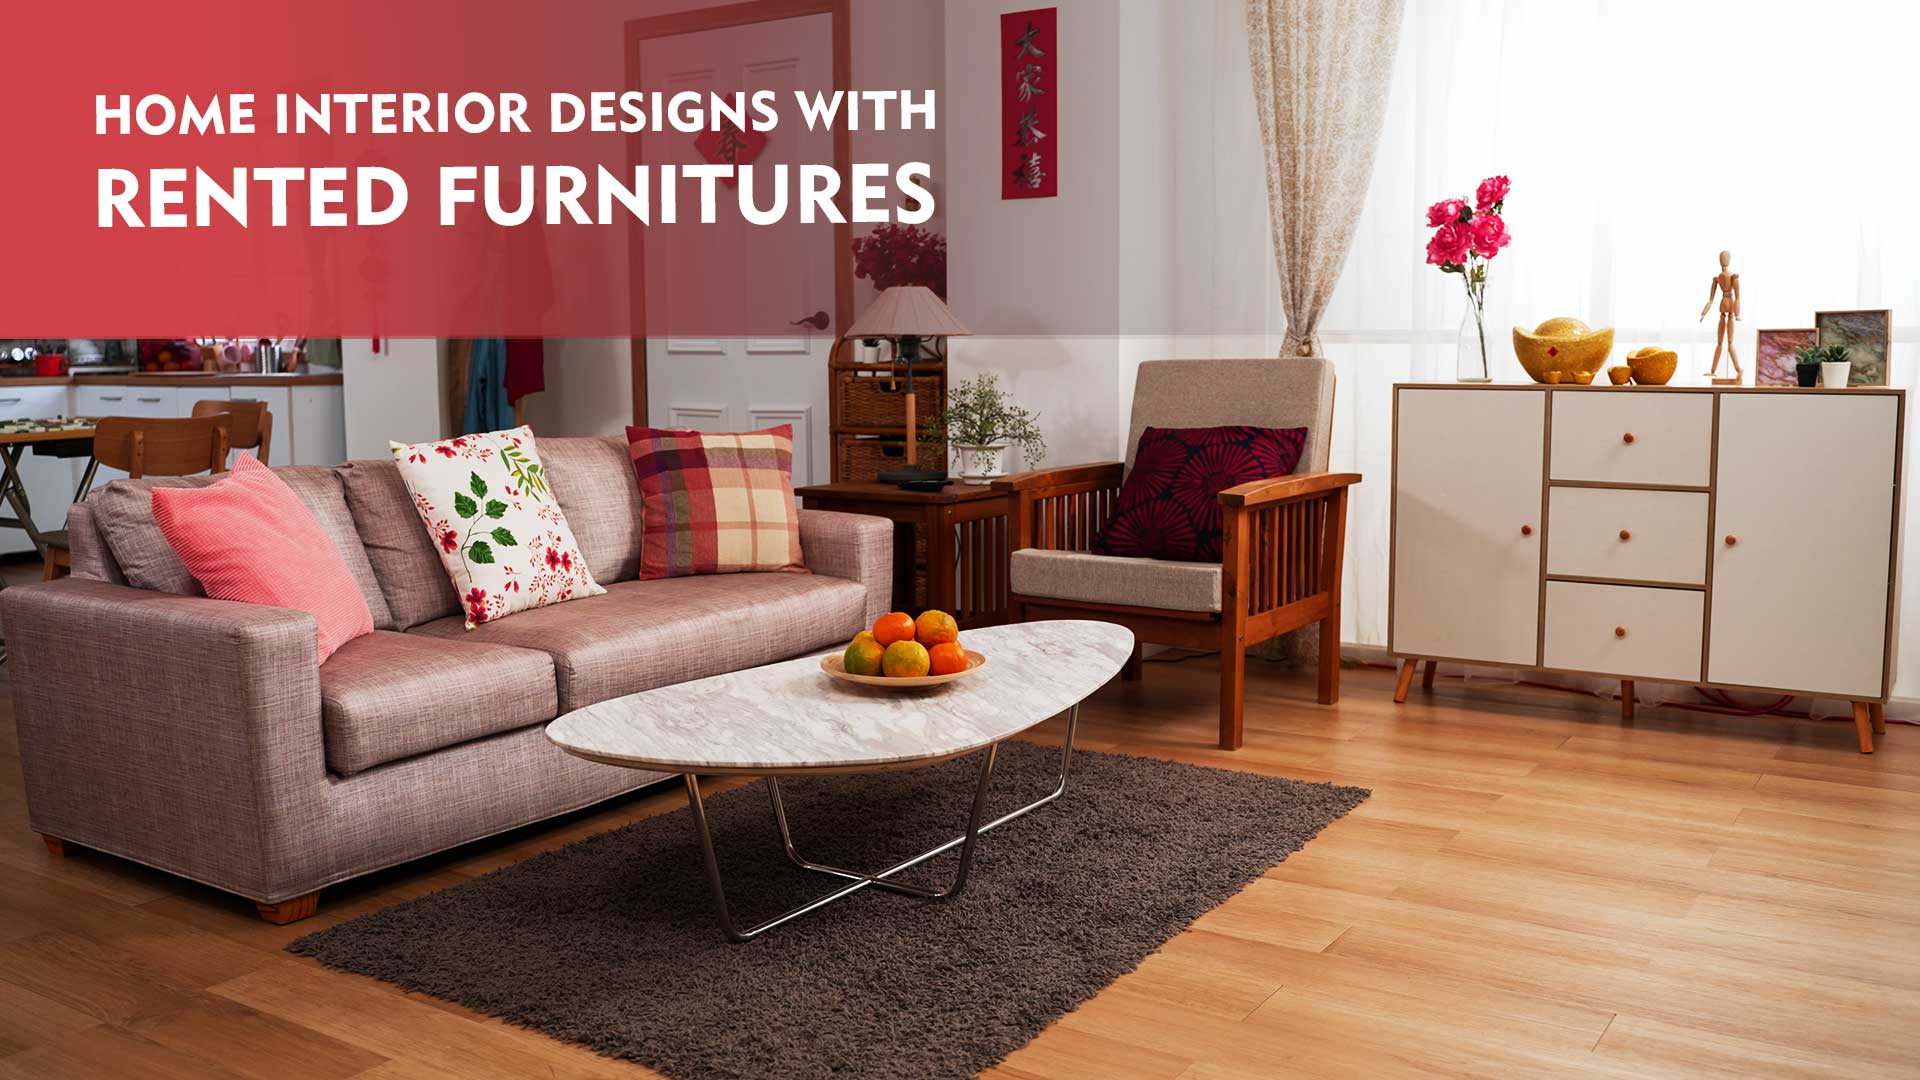 Renting Furniture - Flexibility and Cost-Effective Options